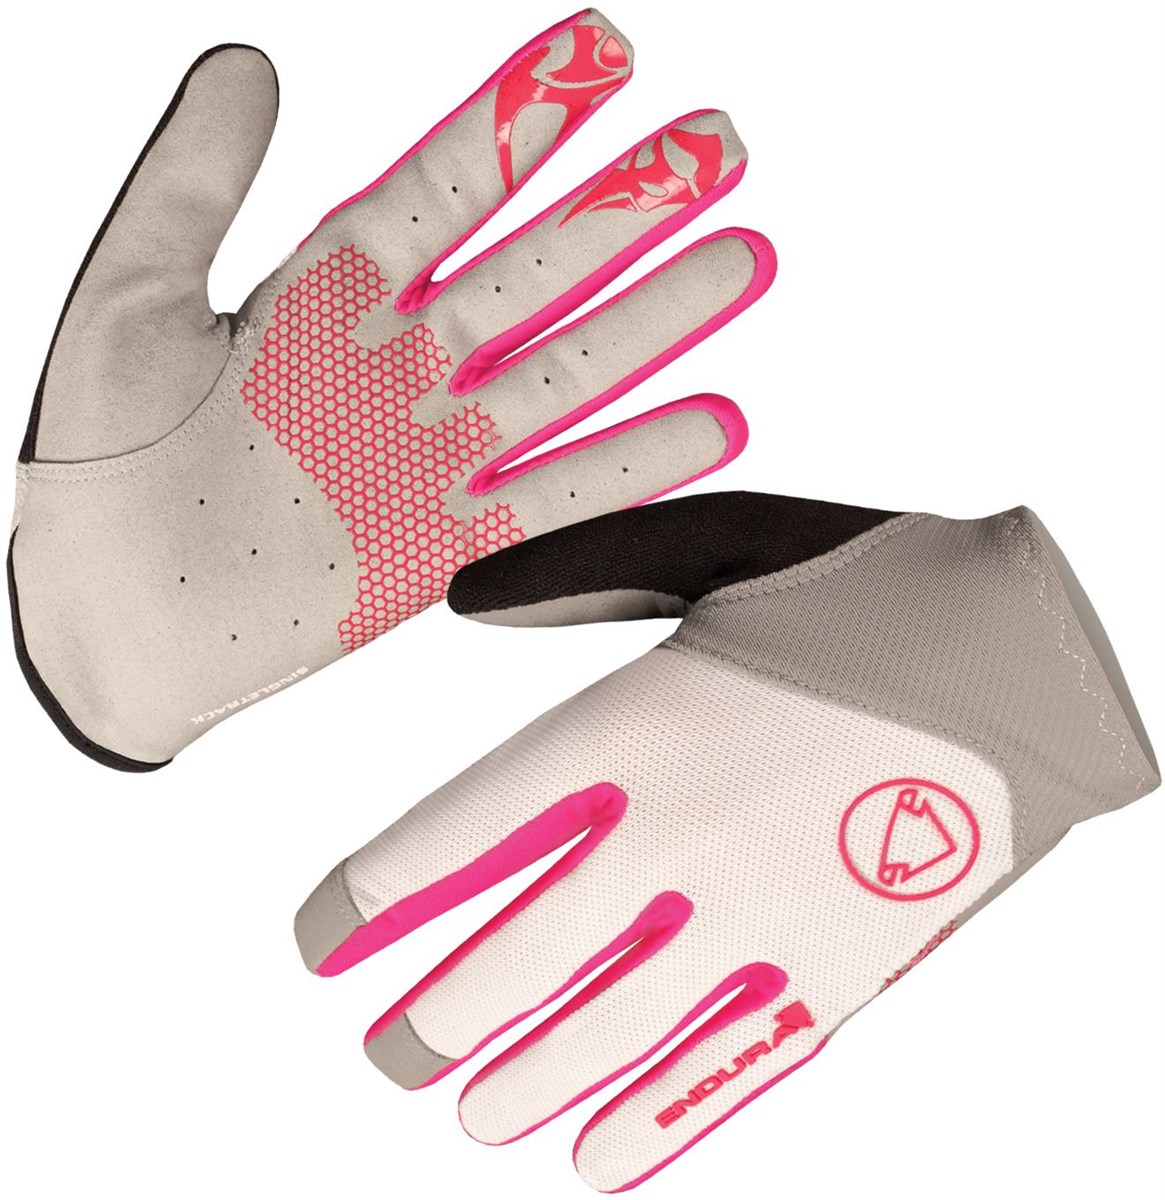 Endura SingleTrack Lite Womens Long Finger Cycling Gloves  AW16 product image